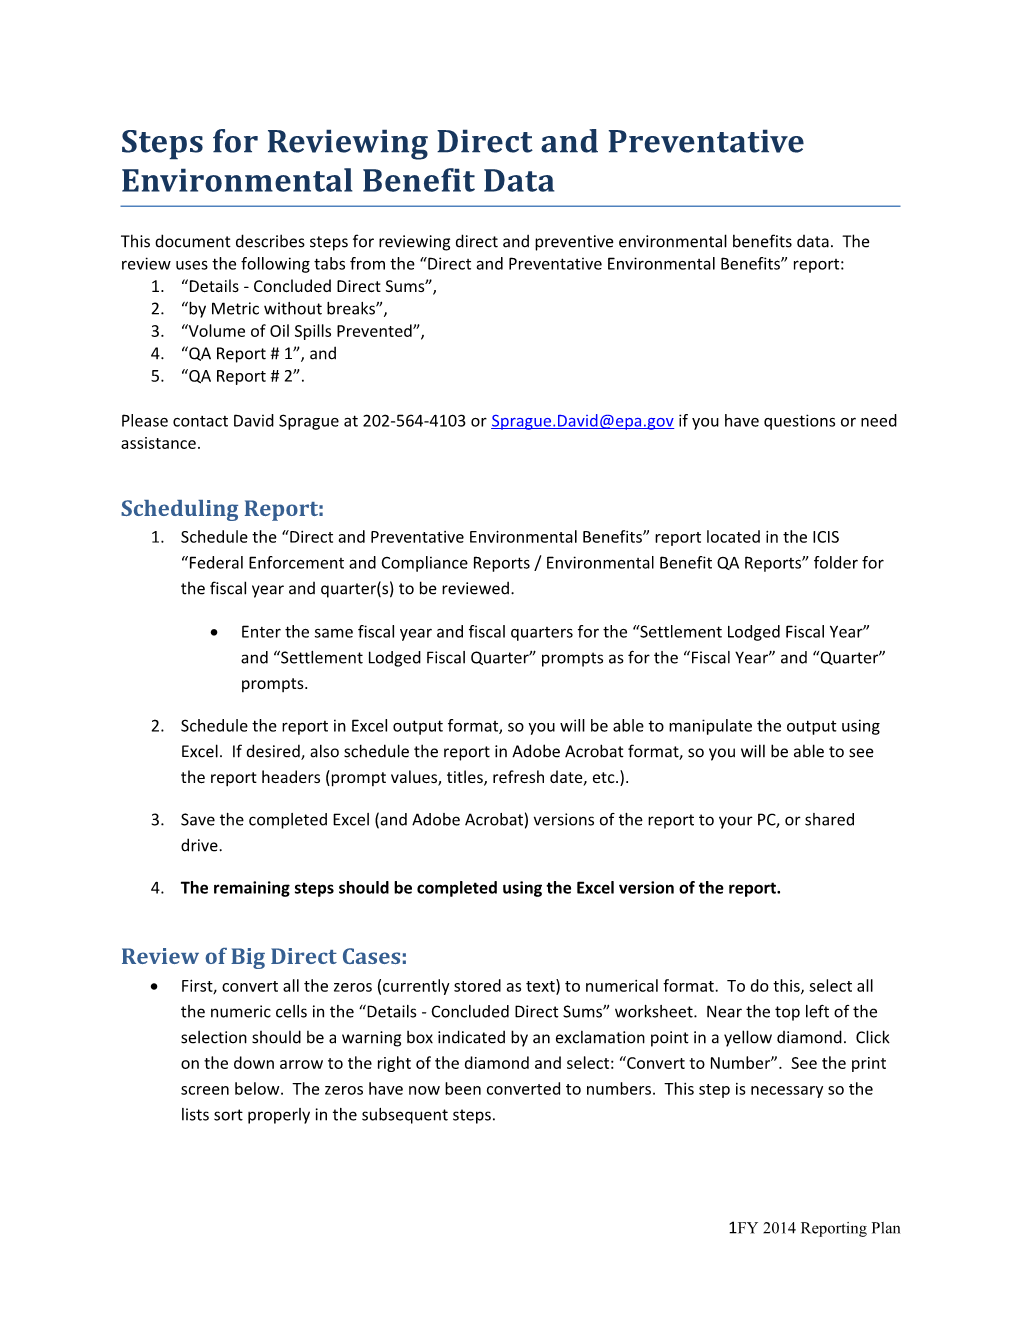 Steps for Reviewing Direct and Preventative Environmental Benefit Data